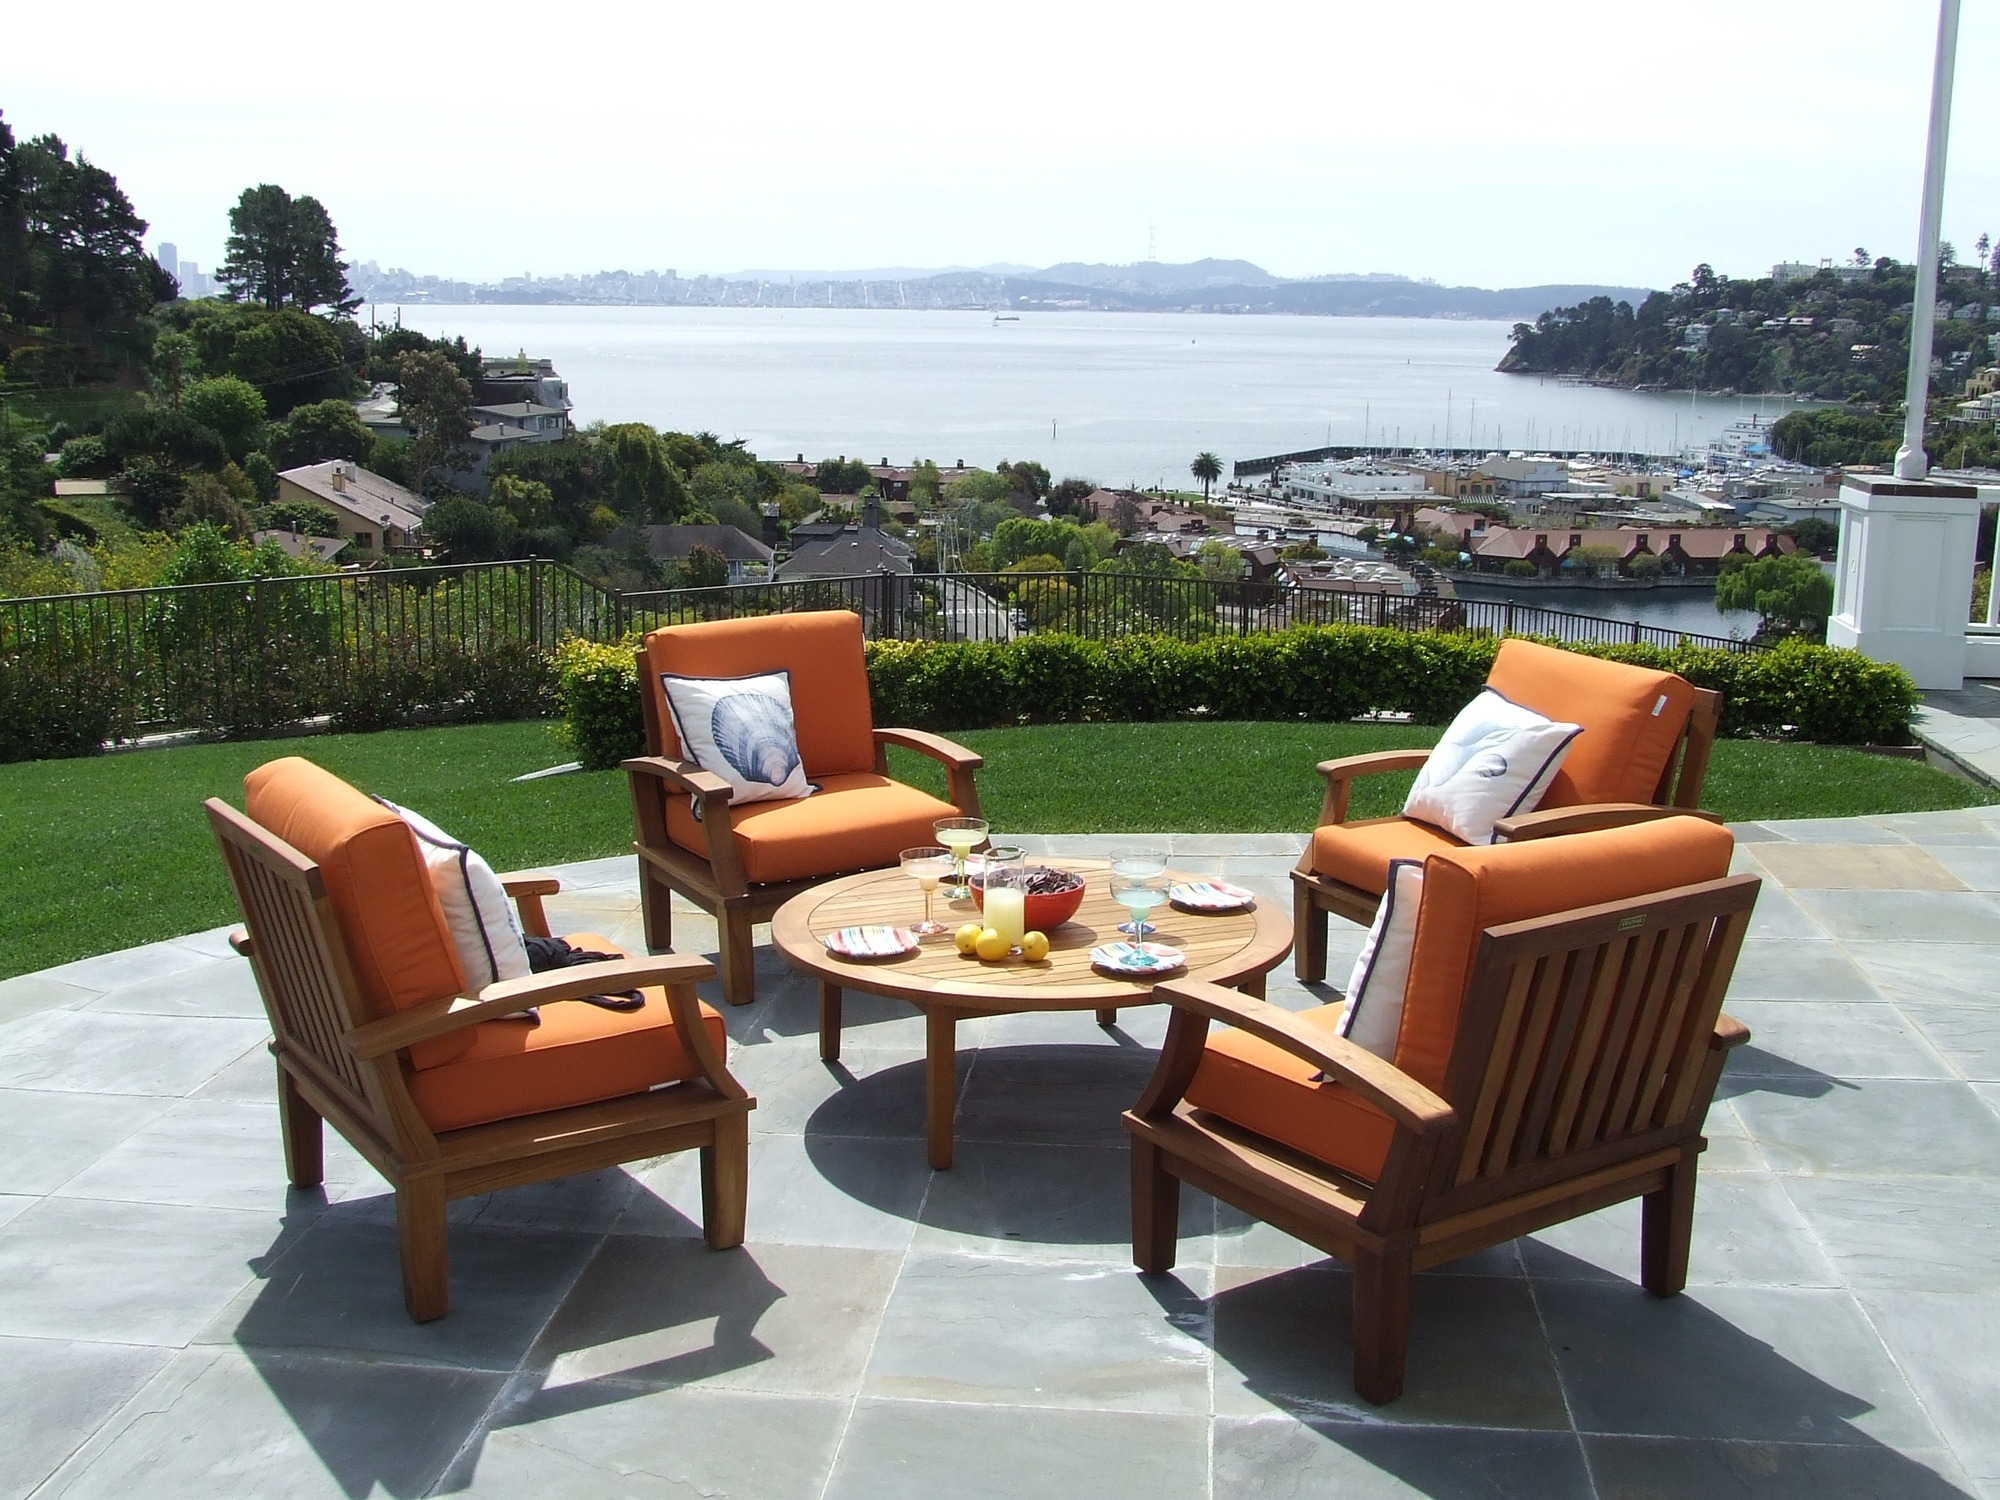 There are several advantages of having an outdoor patio space at home, but how much does a patio cost? This price guide has you covered.